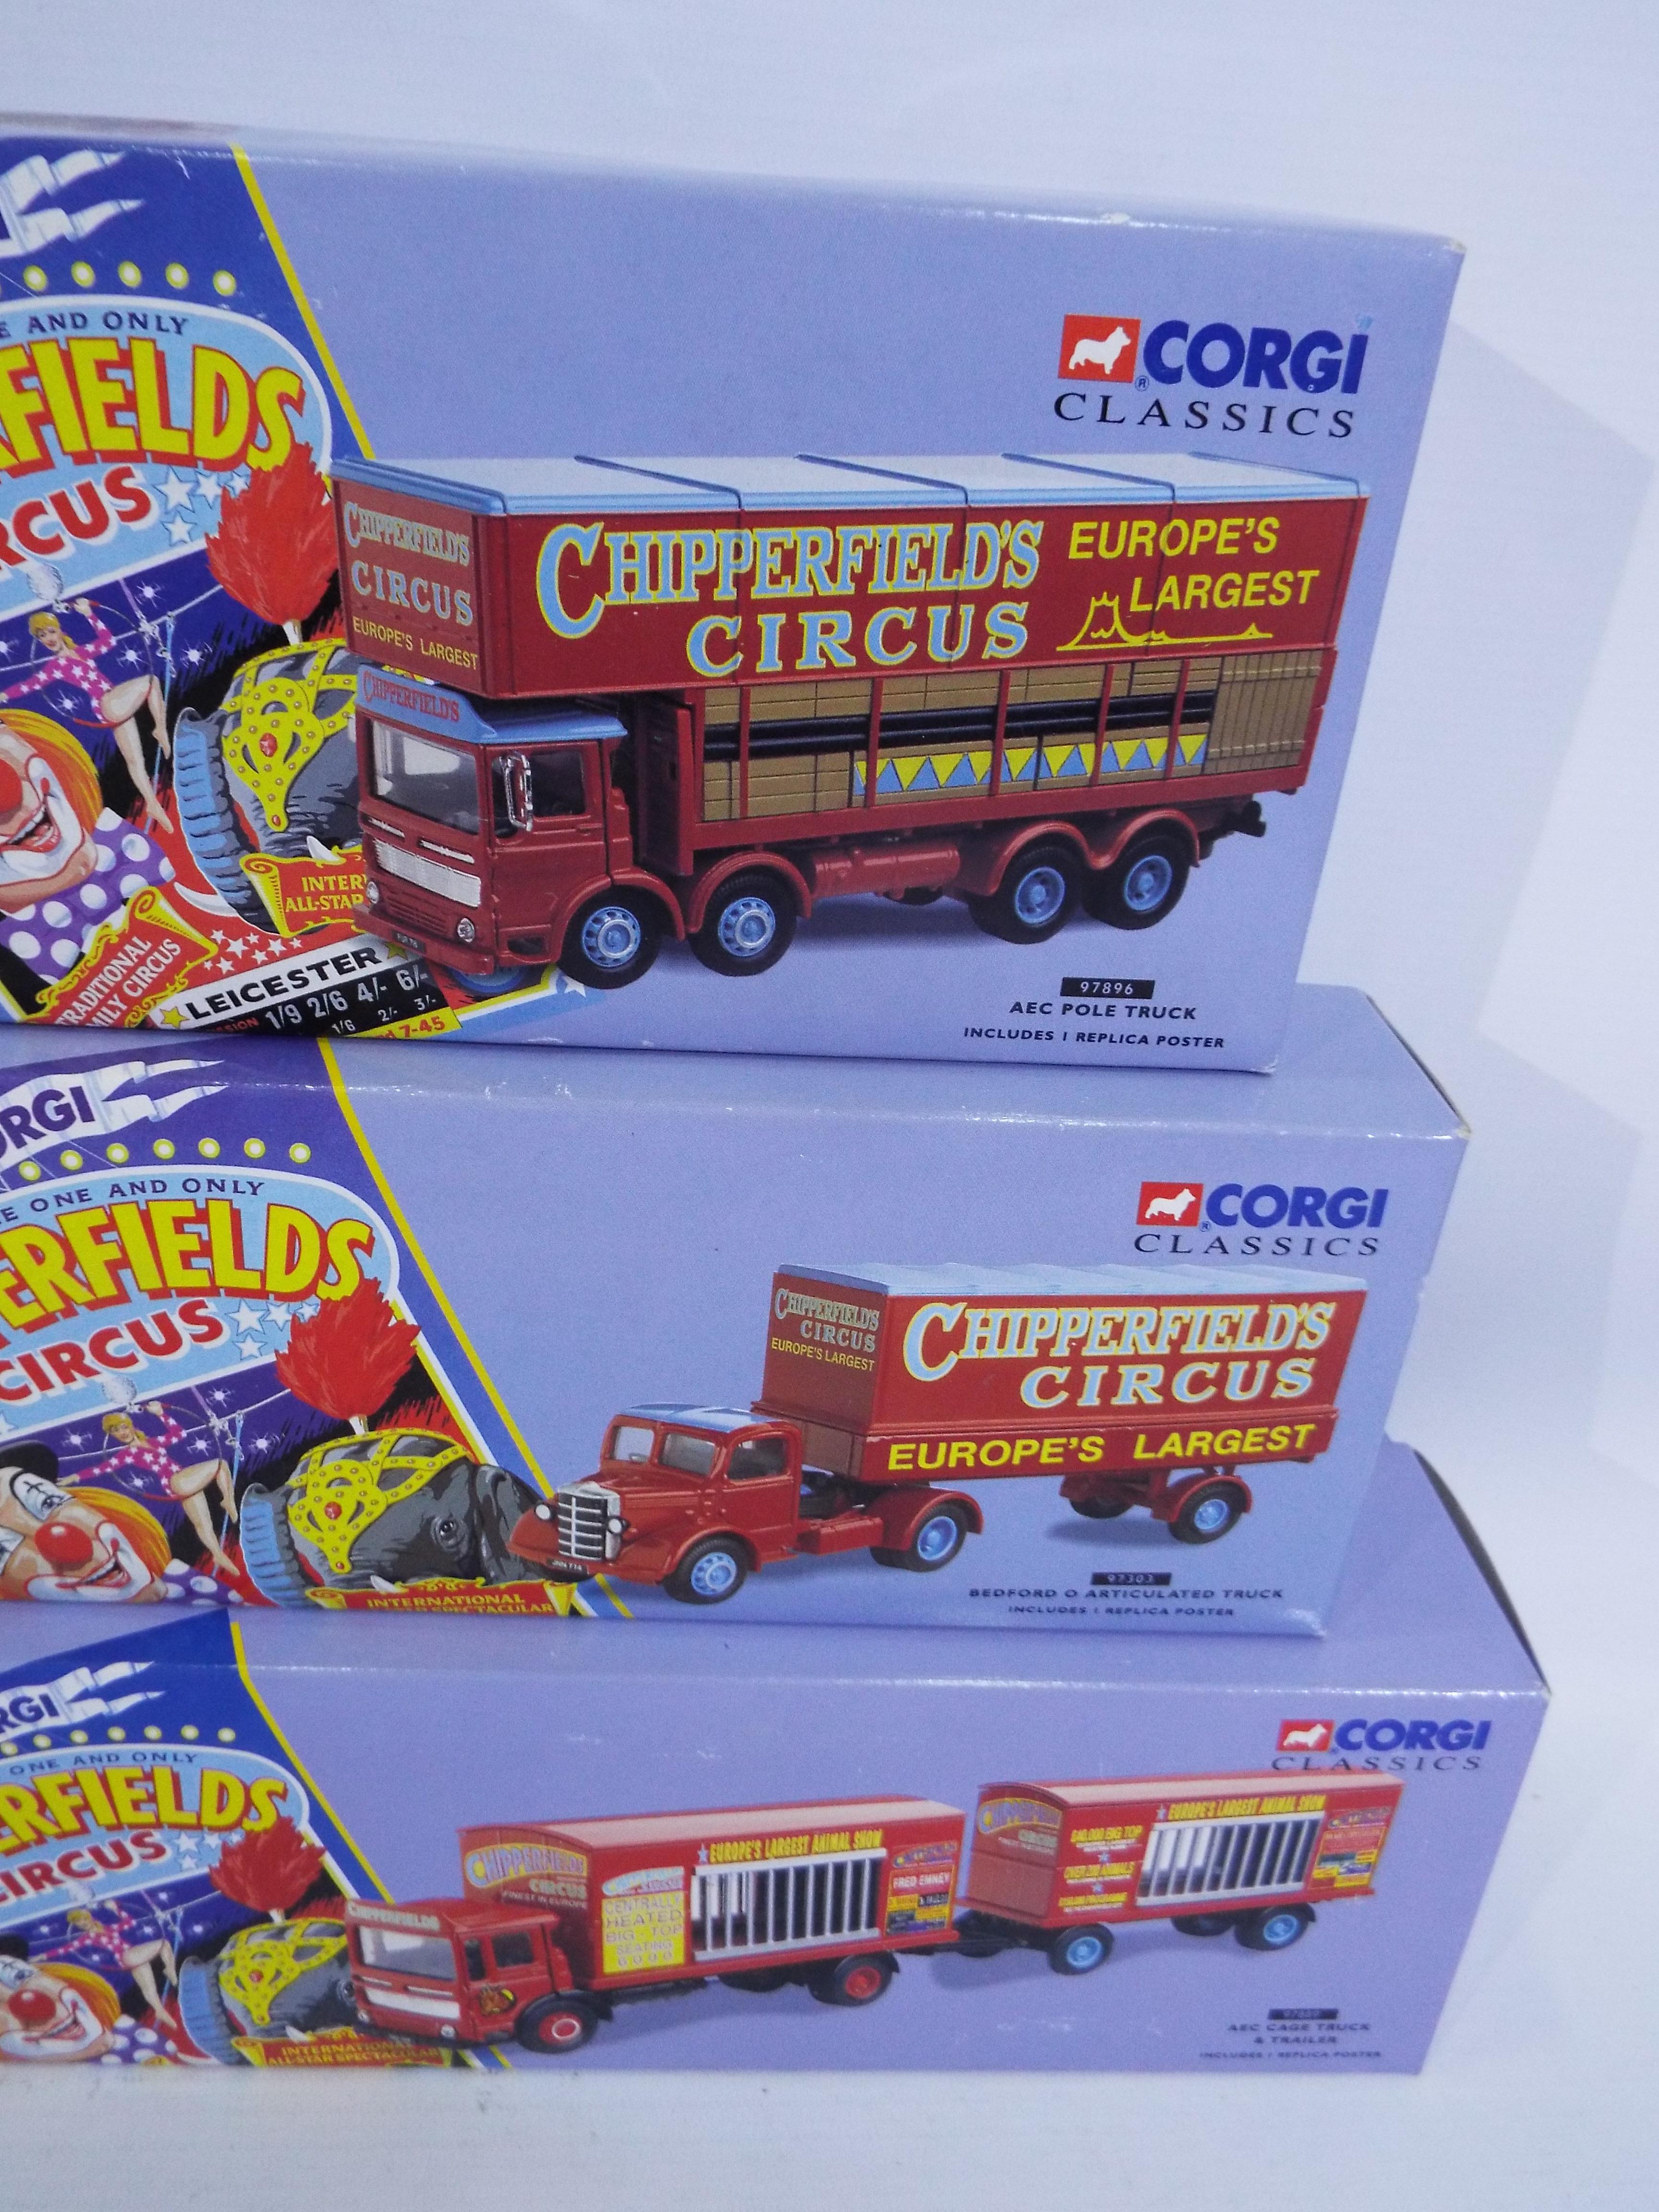 Corgi - 6 x limited edition boxed Corgi vehicles from the Chipperfield's Circus series - Lot - Image 4 of 4